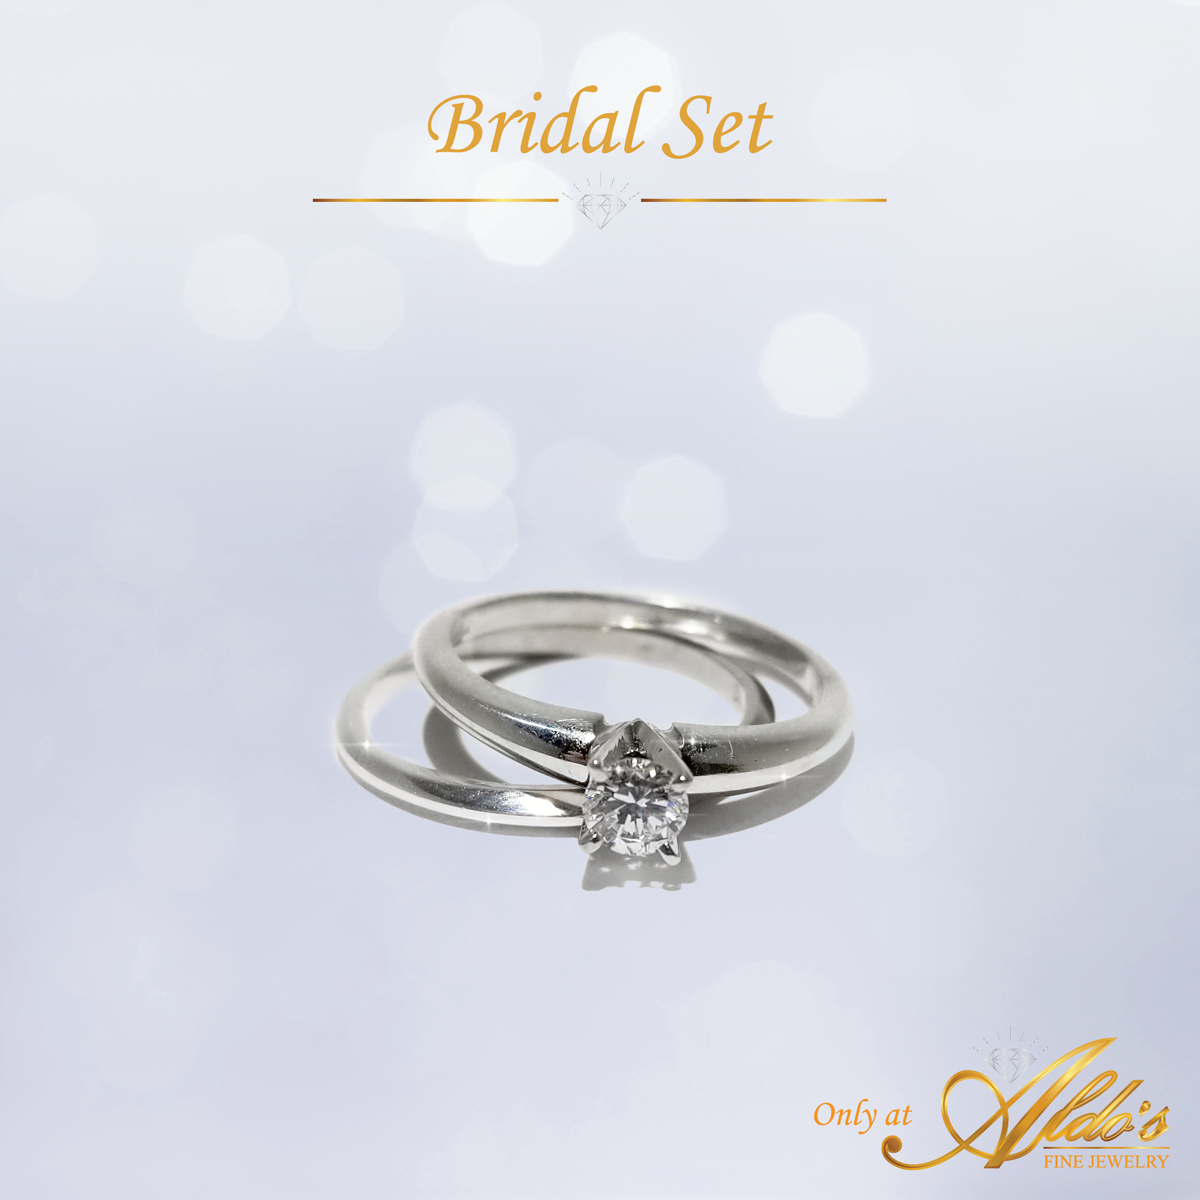 We are sure that no one can't resist a #bridal 💍 #set #rings like this one's!  Take the most important step of your life with Aldo's Fine Jewelry 💓😊

#Jewelry #Bridal #Ring #Diamonds #Amazing #BridalRings #Stone #Diamond #Ring #SetRing